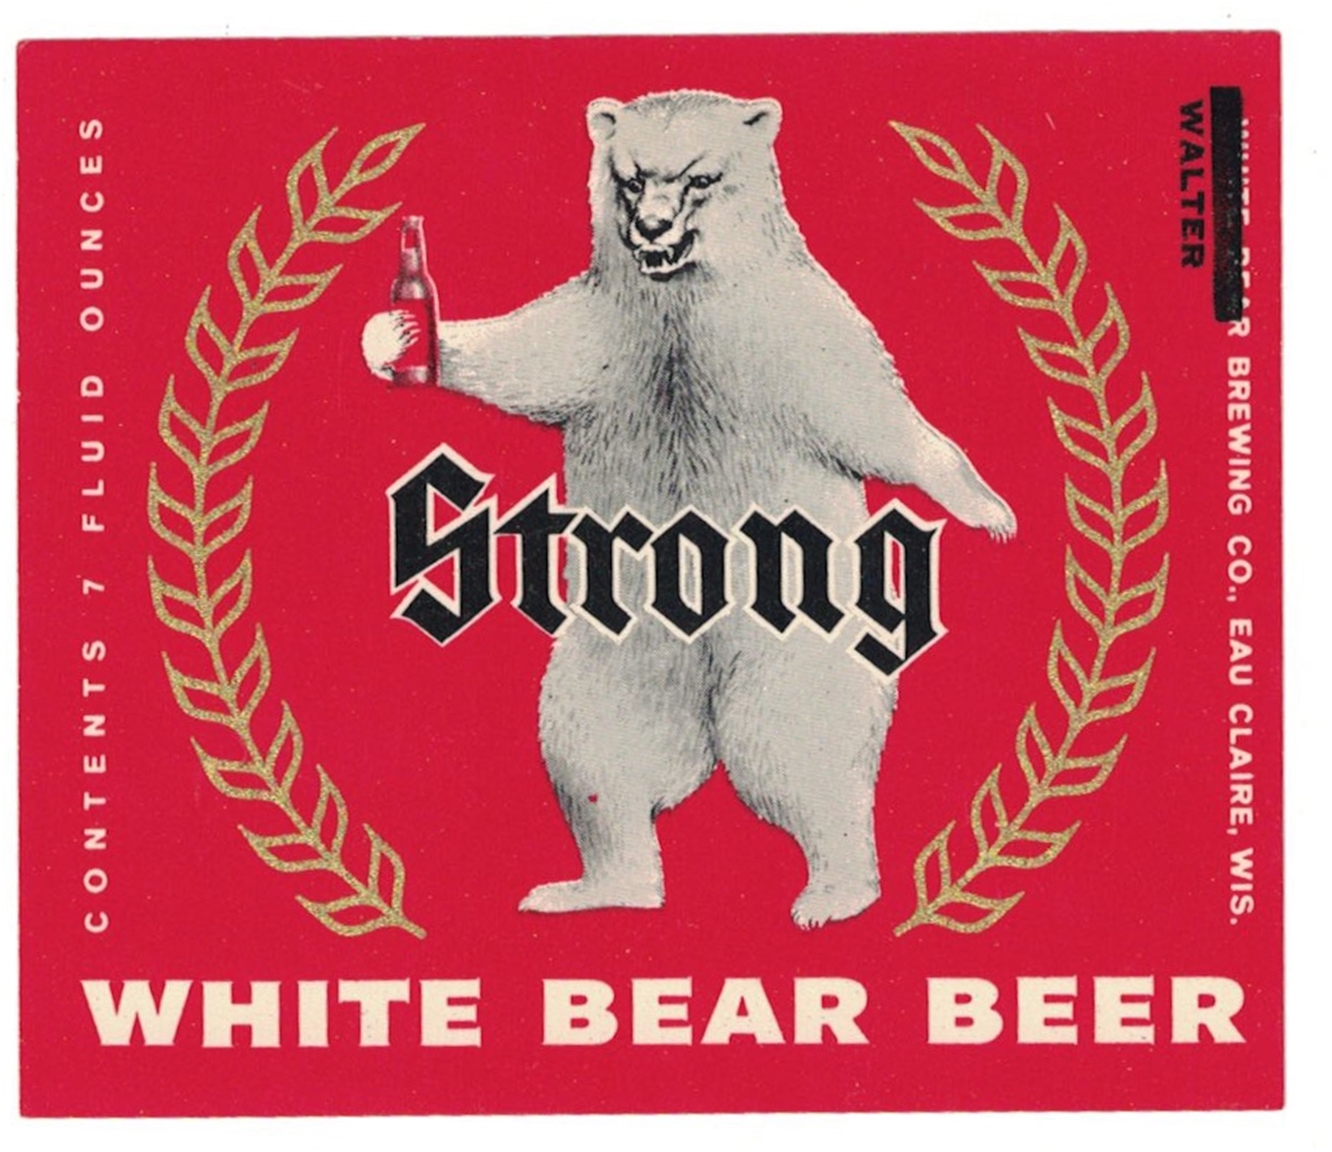 White Bear Strong Beer Label